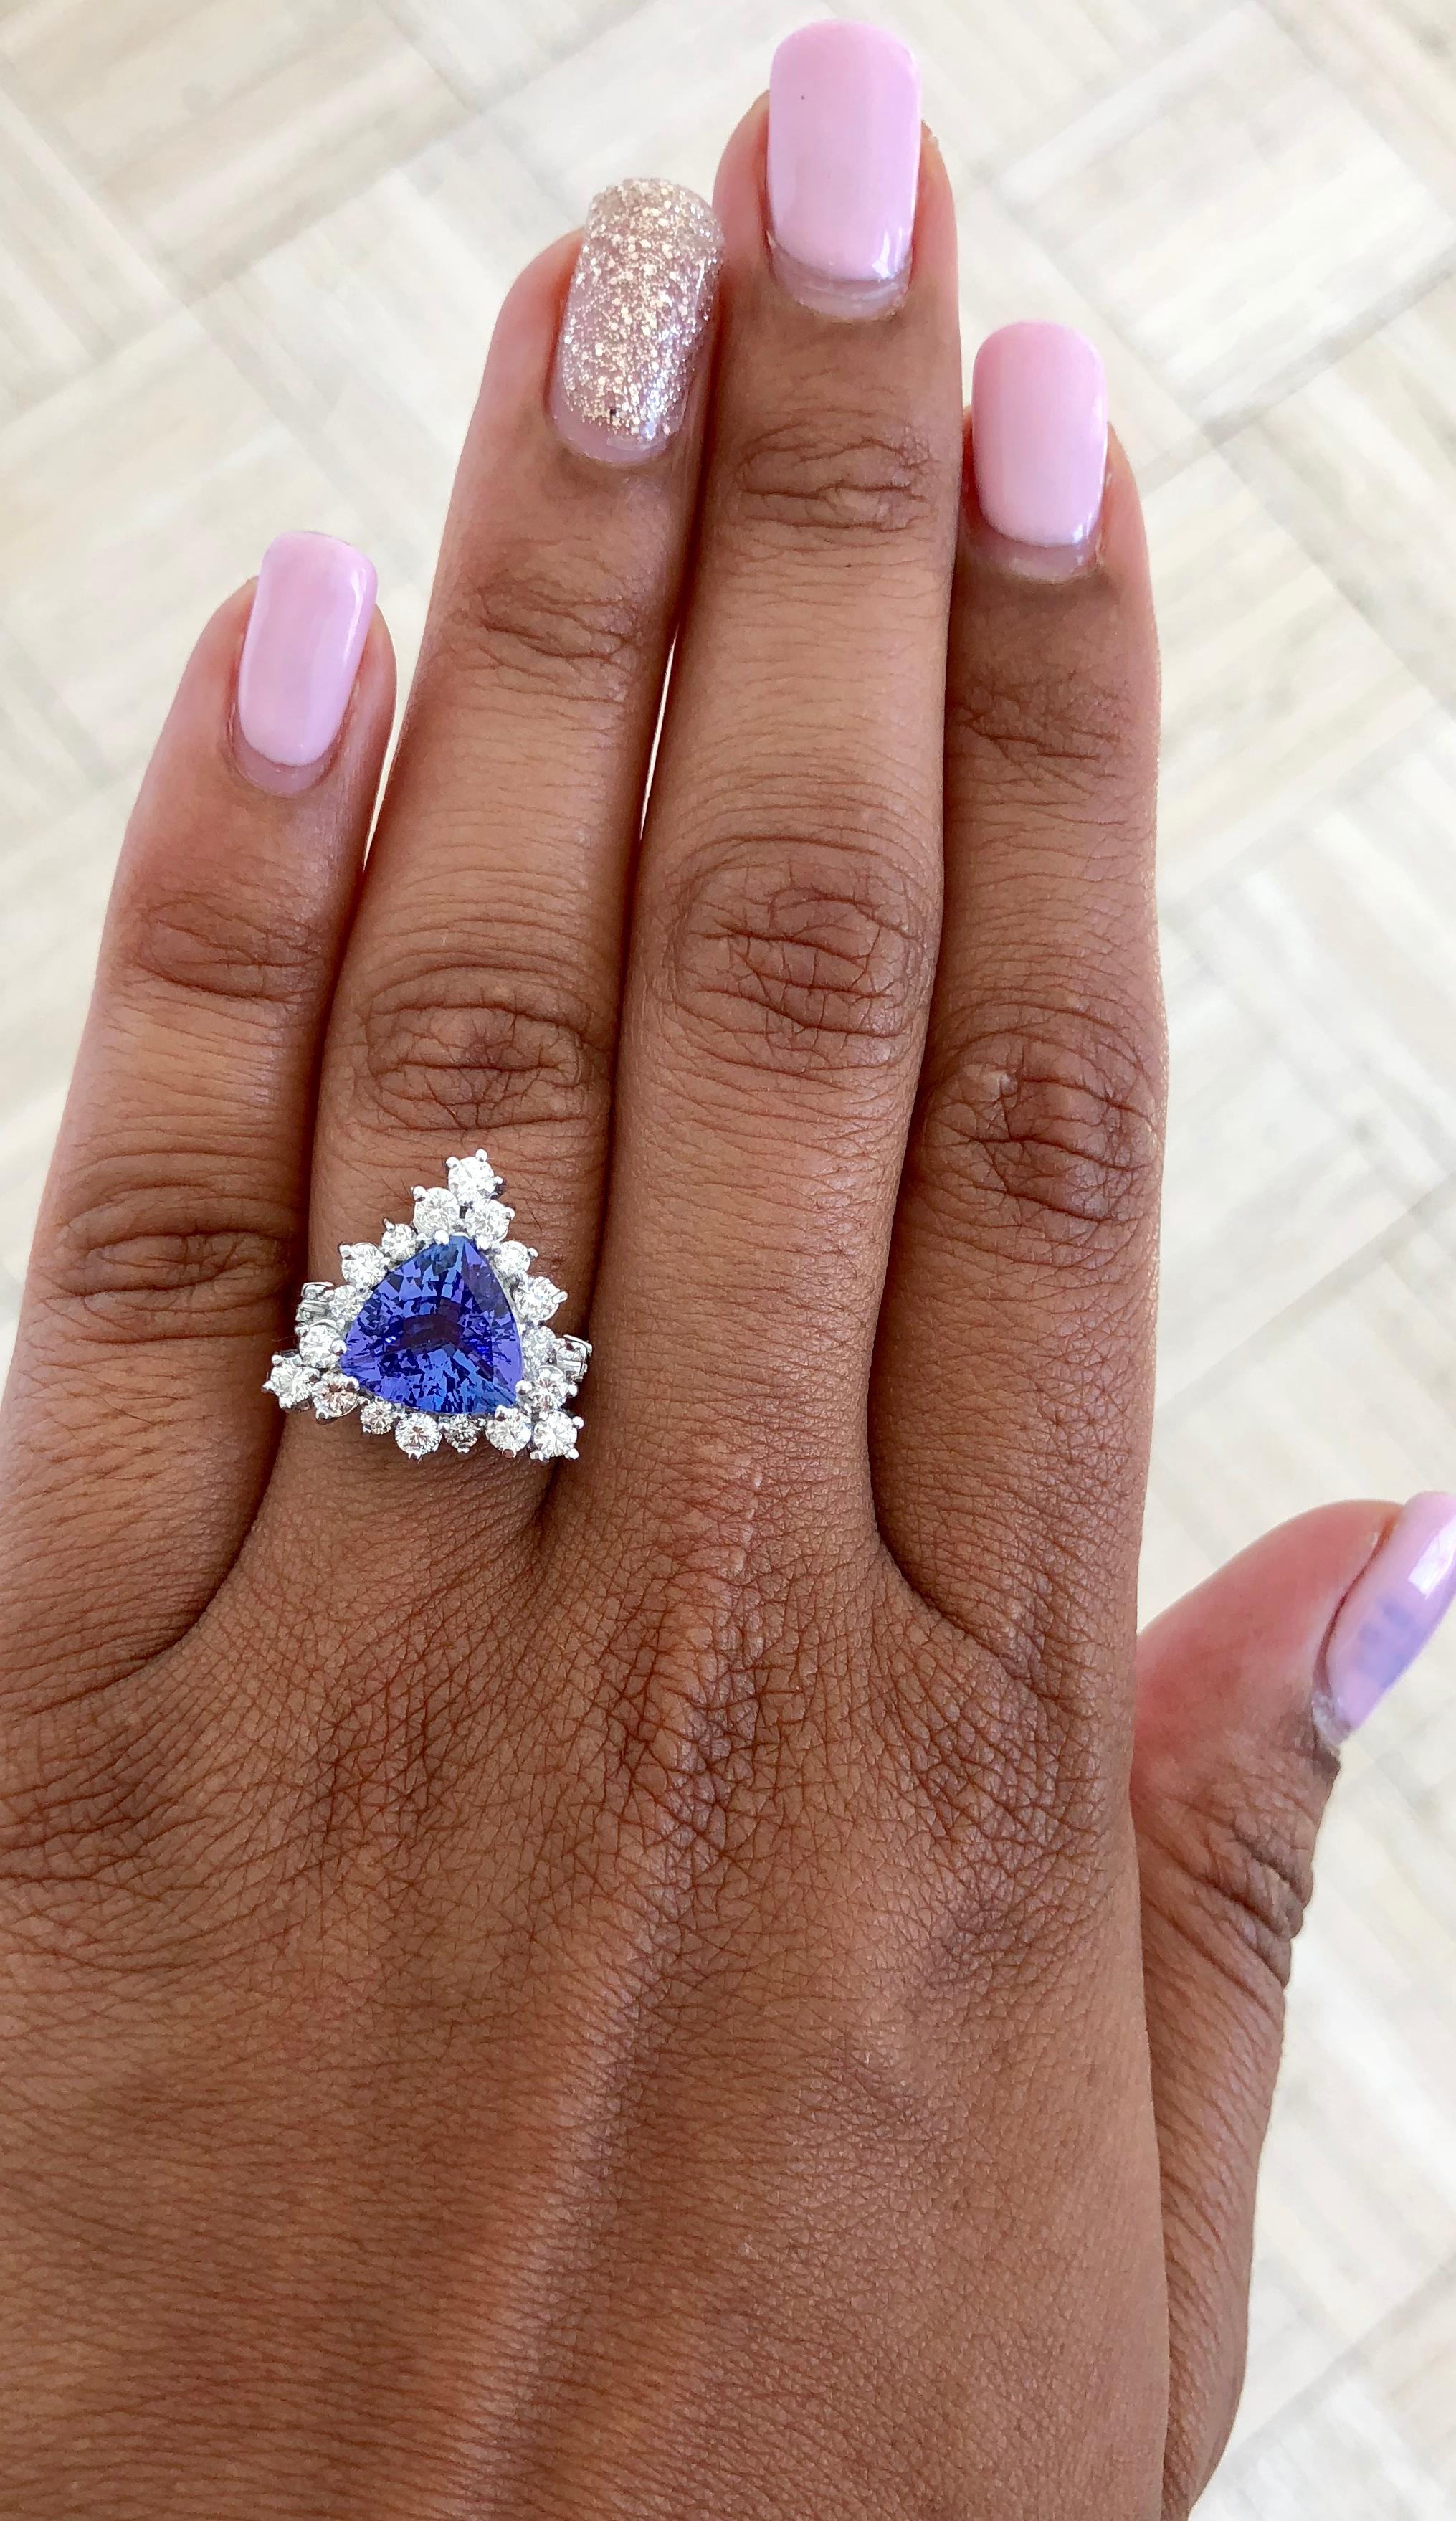 3.45 Carat Trillion Cut Tanzanite Diamond Cocktail Ring 14 Karat White Gold In New Condition For Sale In Los Angeles, CA